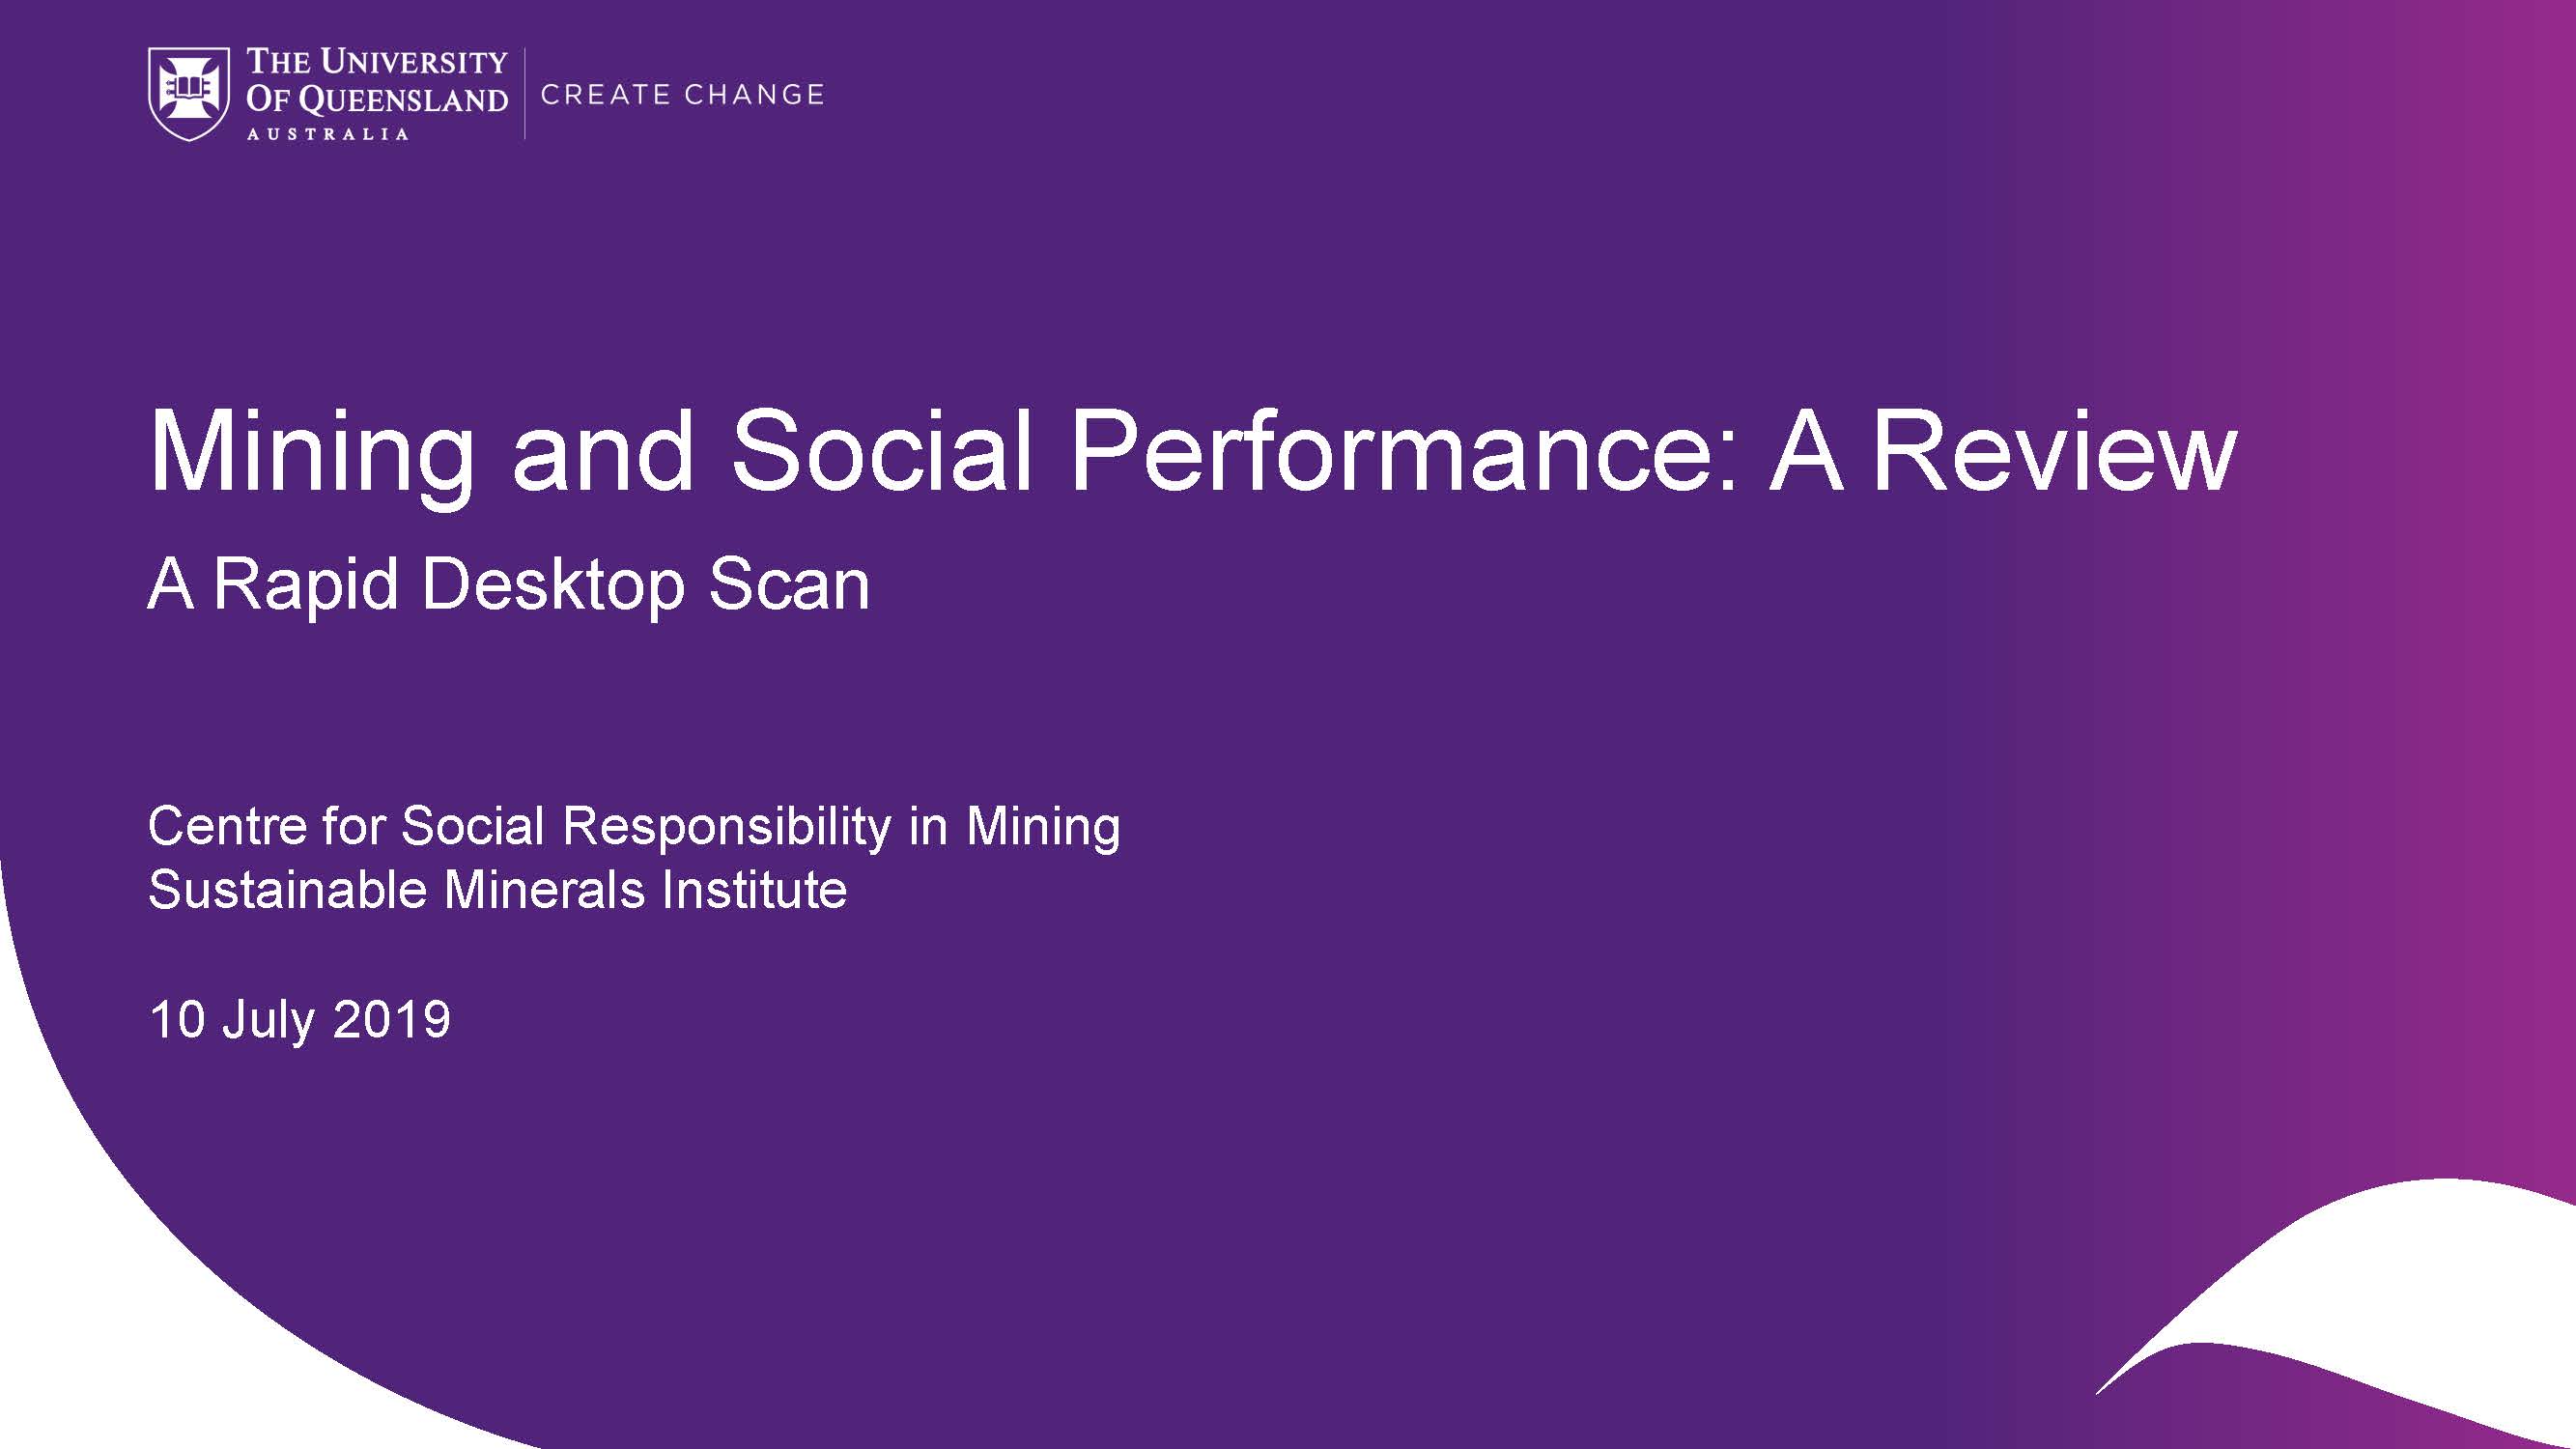 A rapid desktop scan of social performance of 14 extractive companies